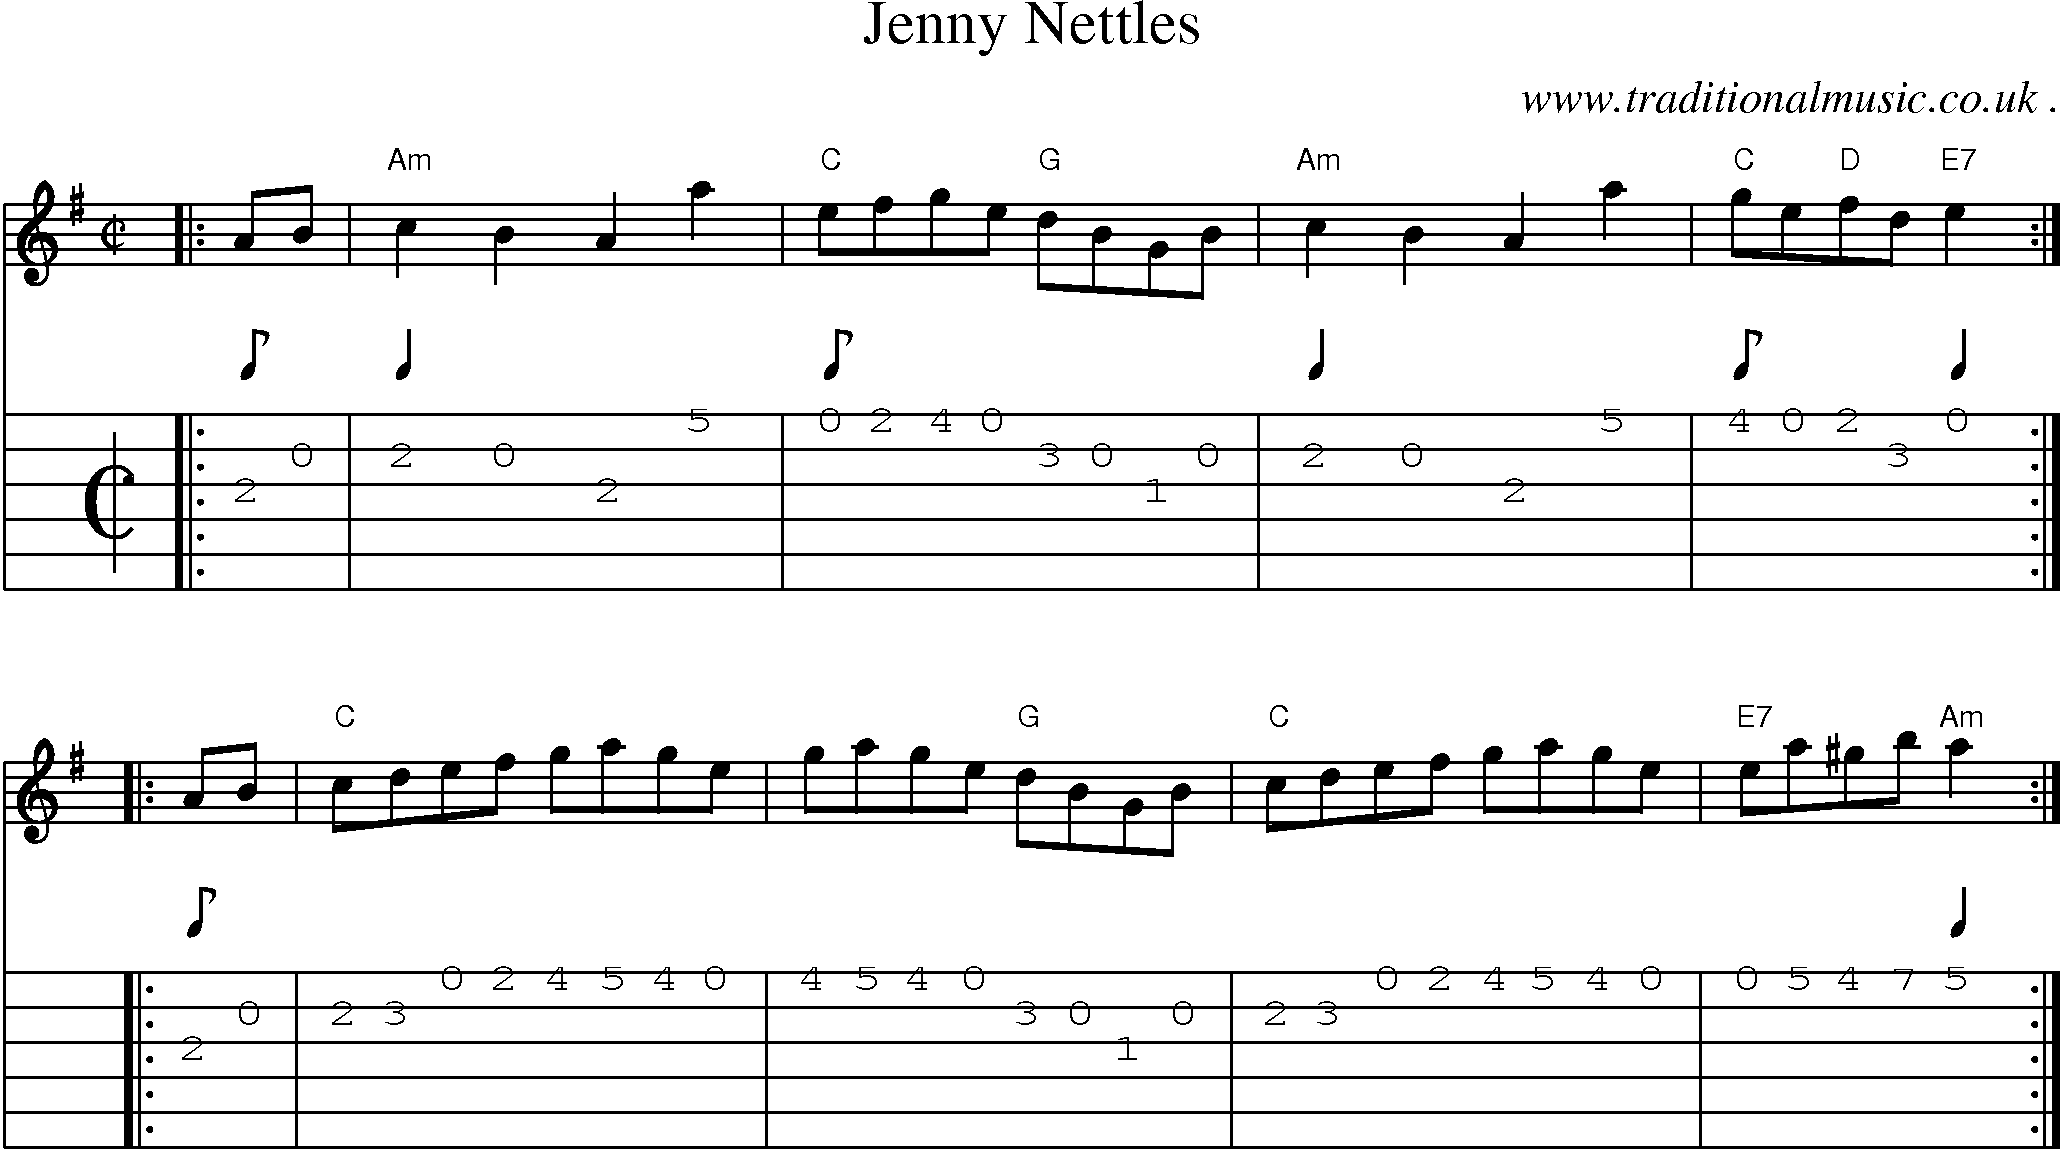 Sheet-music  score, Chords and Guitar Tabs for Jenny Nettles